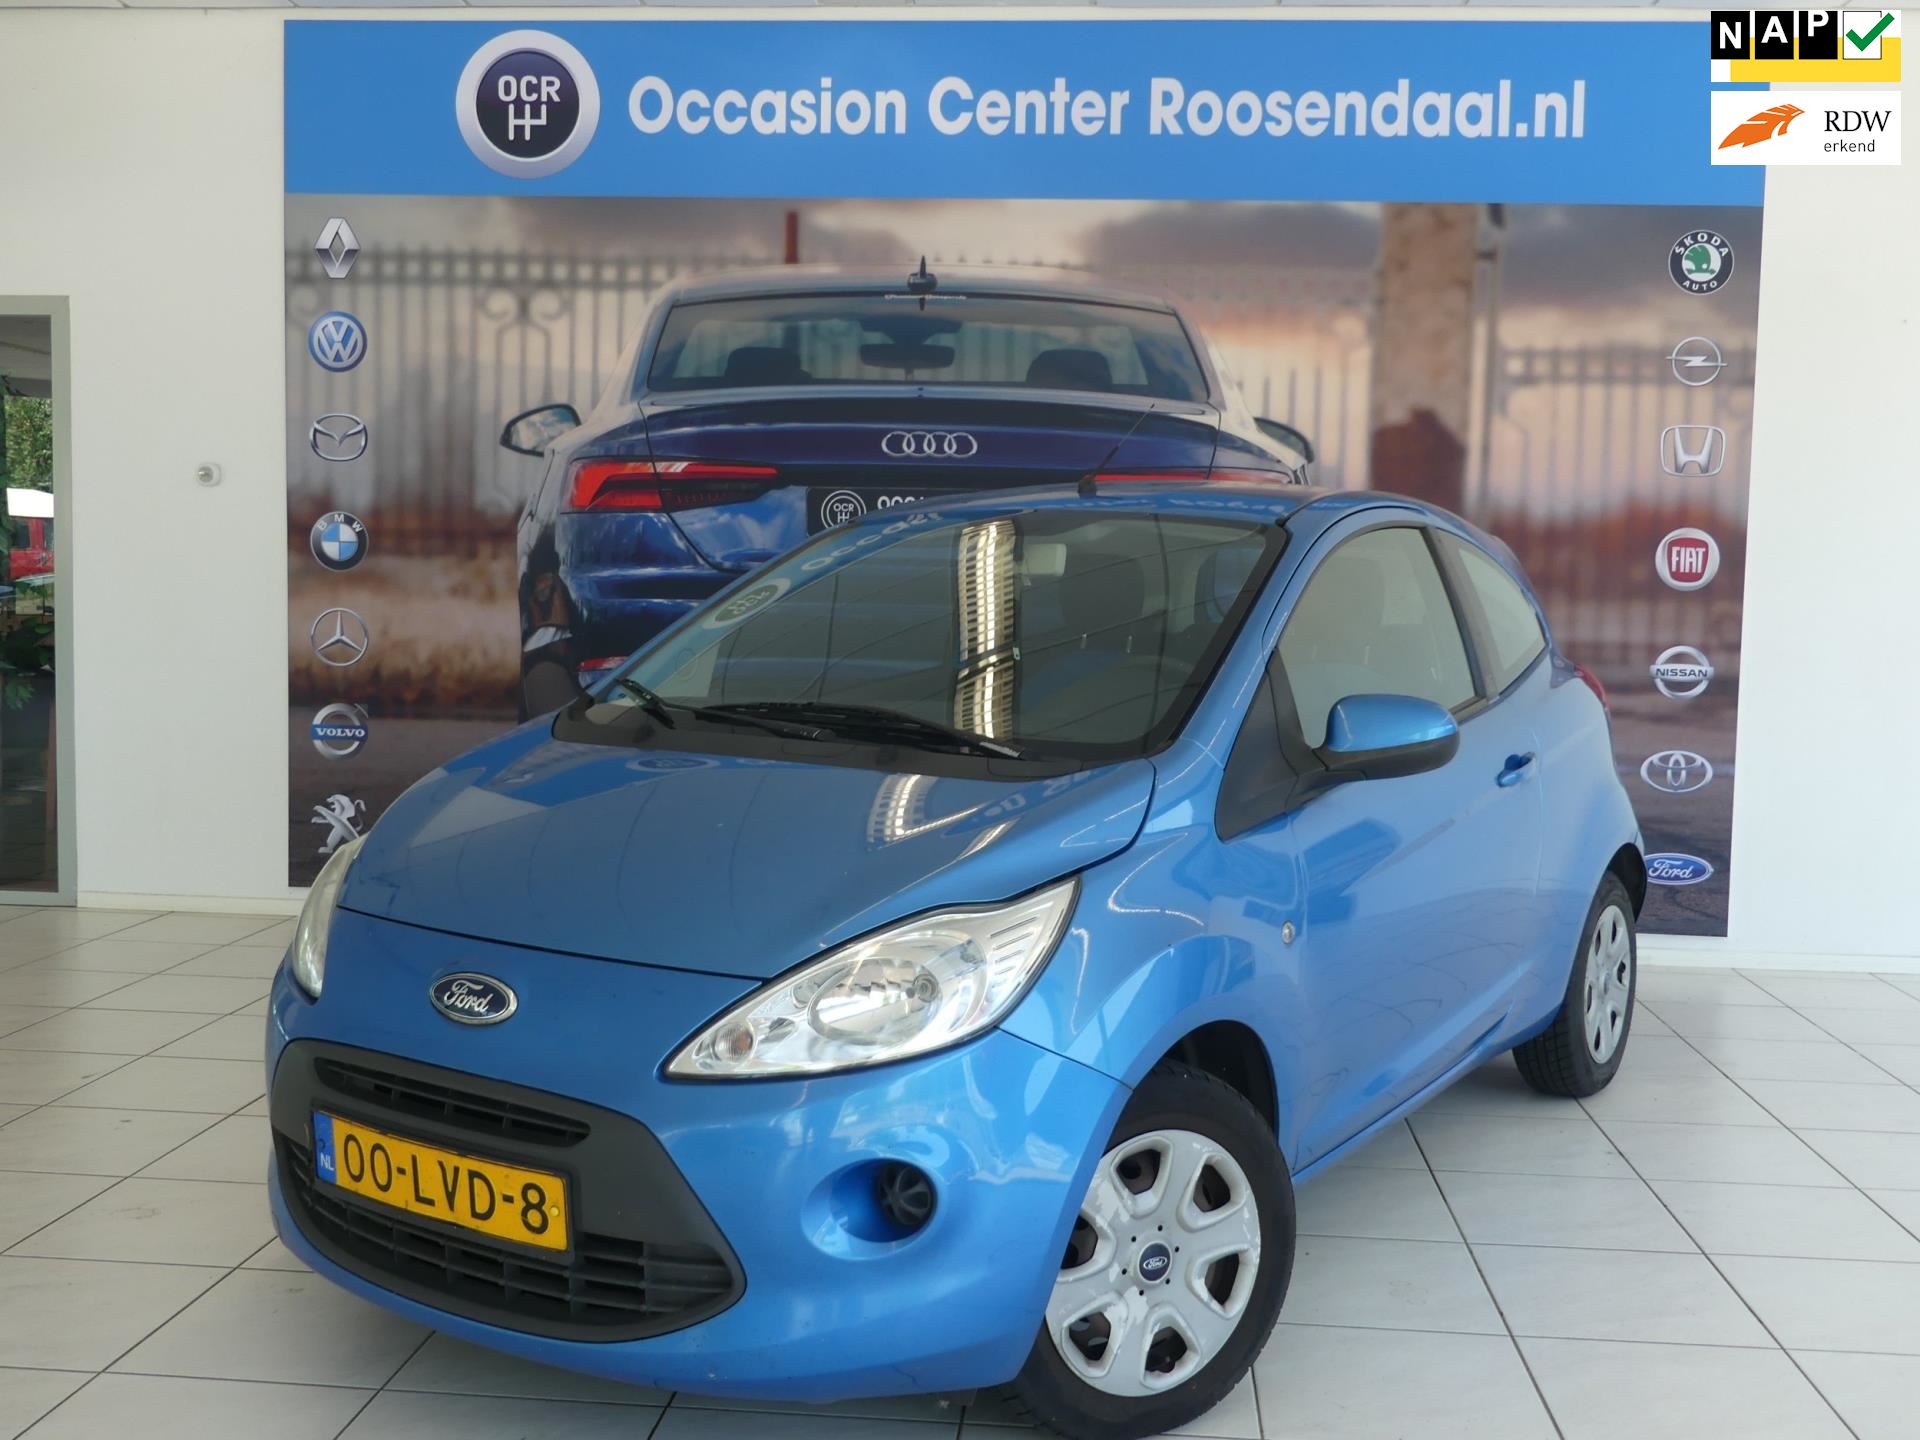 Ford Ka occasion - Occasion Center Roosendaal